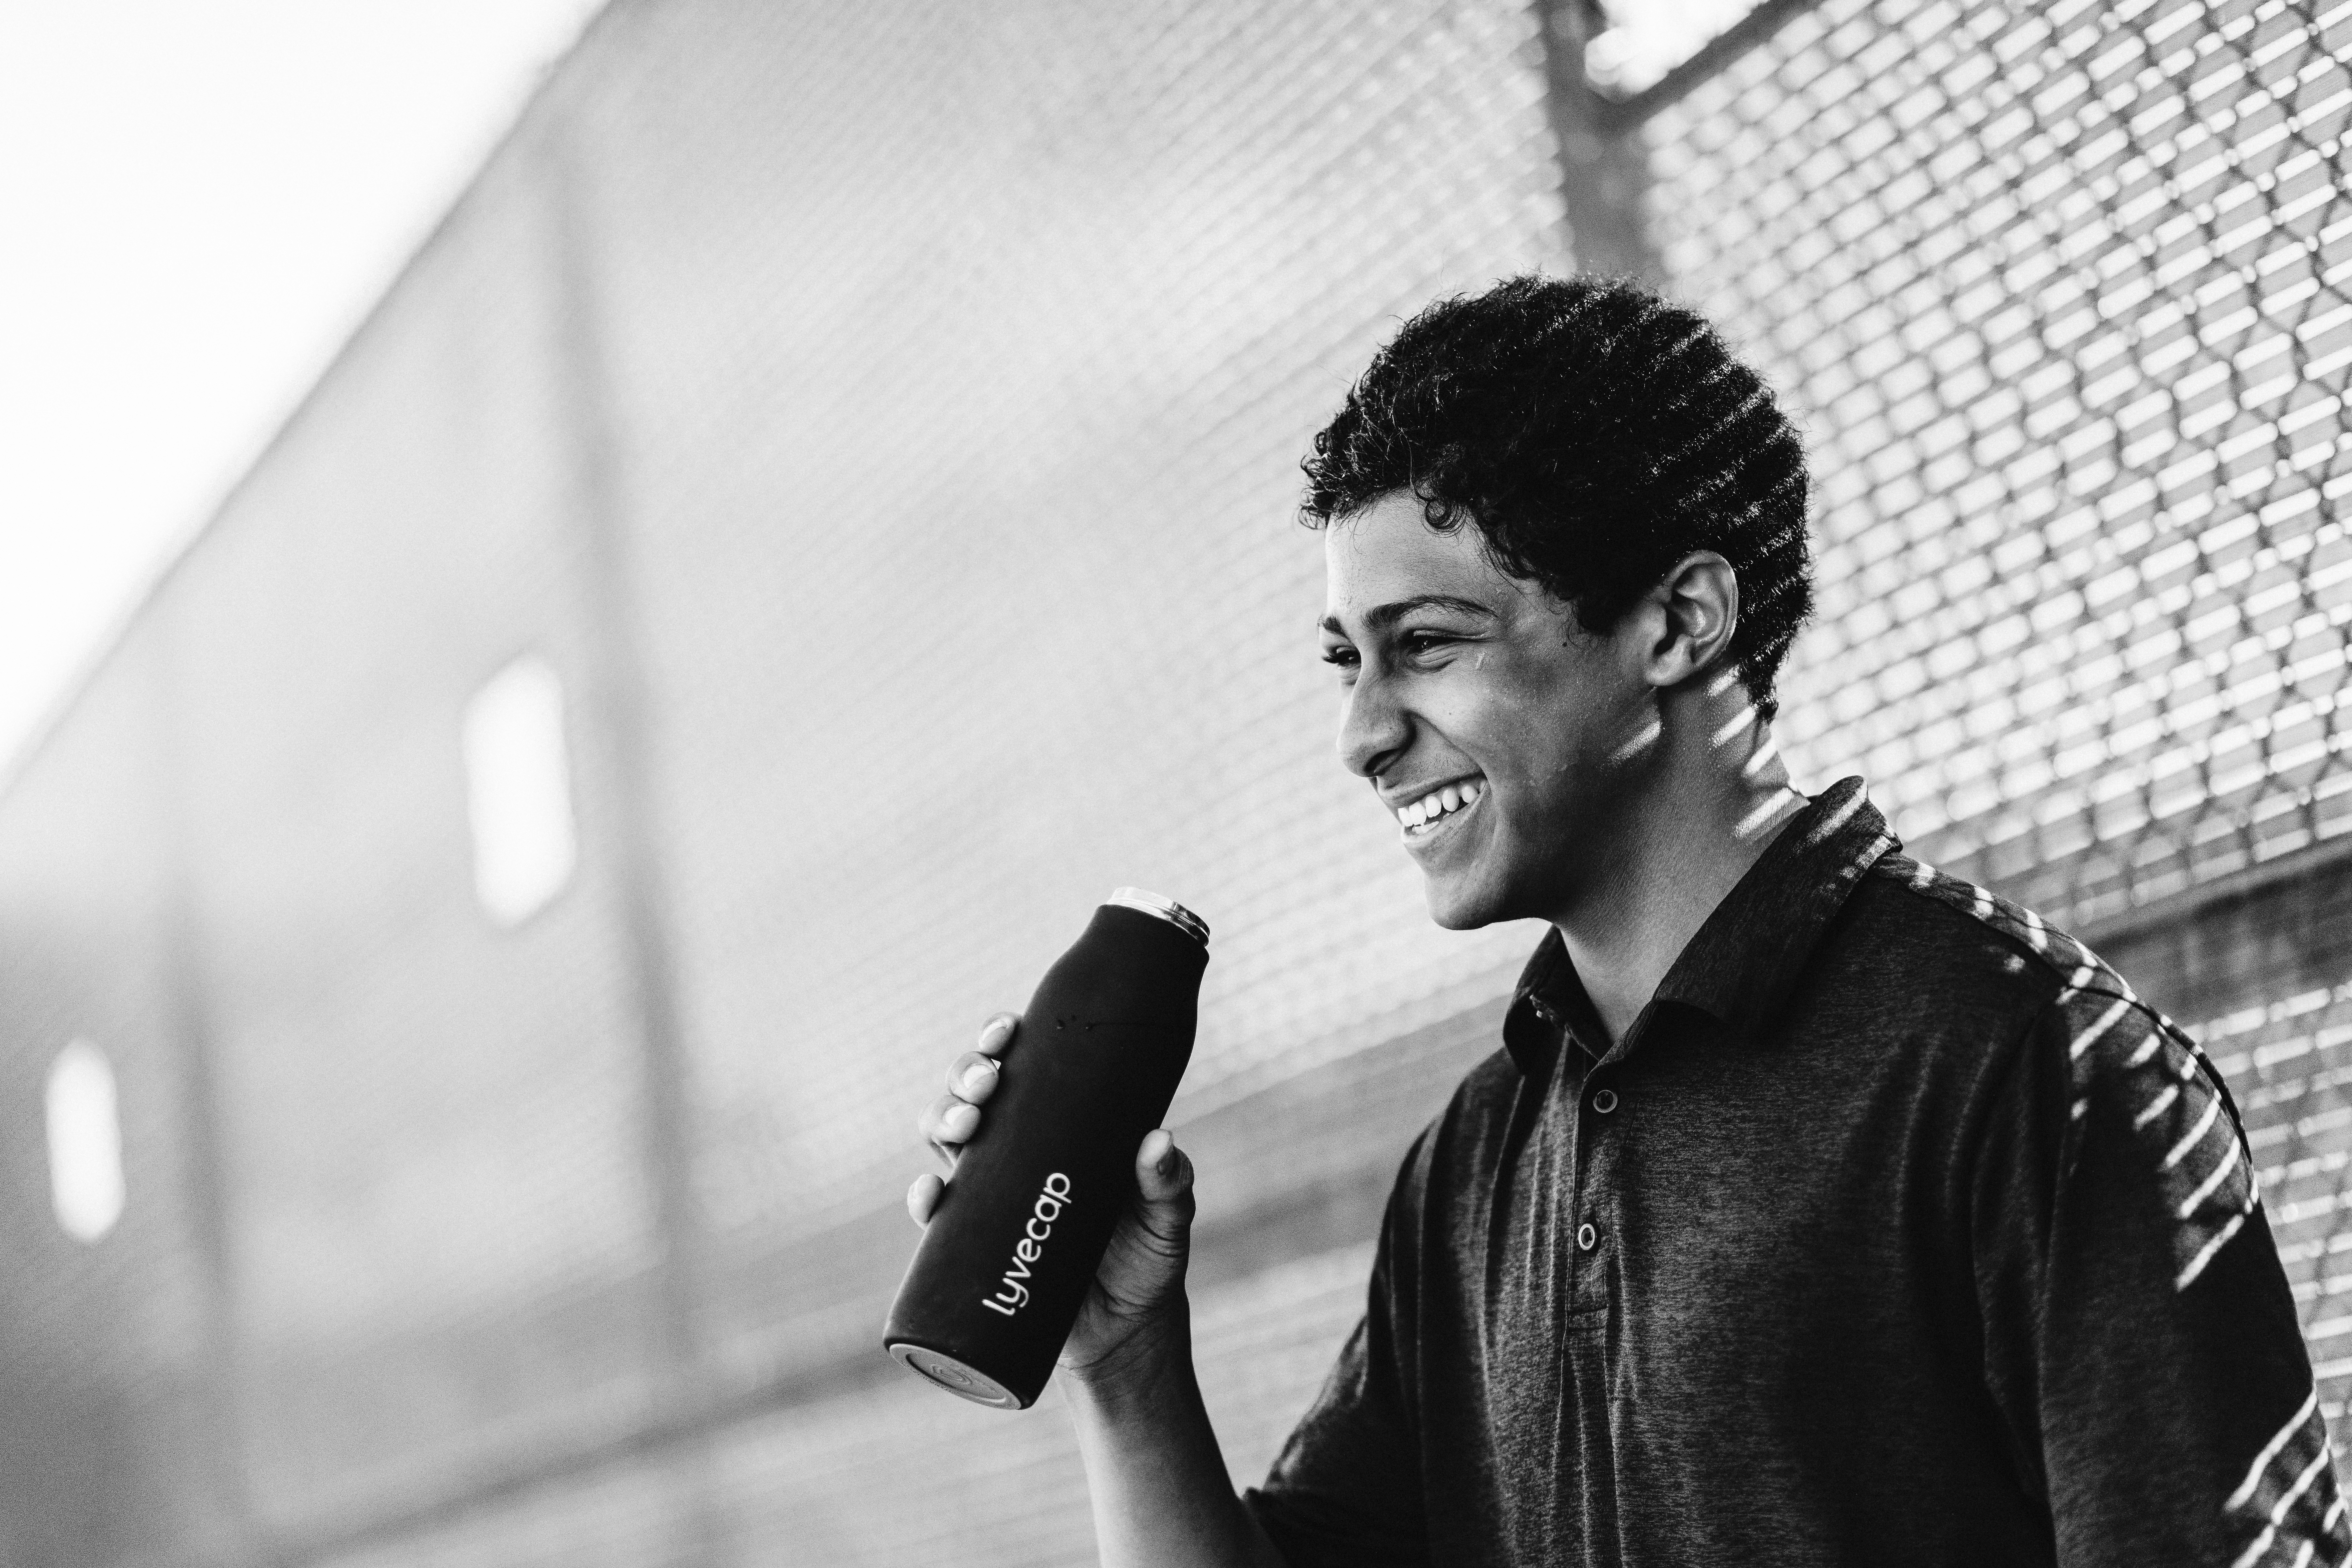 black and white image of a young man laughing against a chain link fence, while drinking out of a lyvecap probiotic bottle